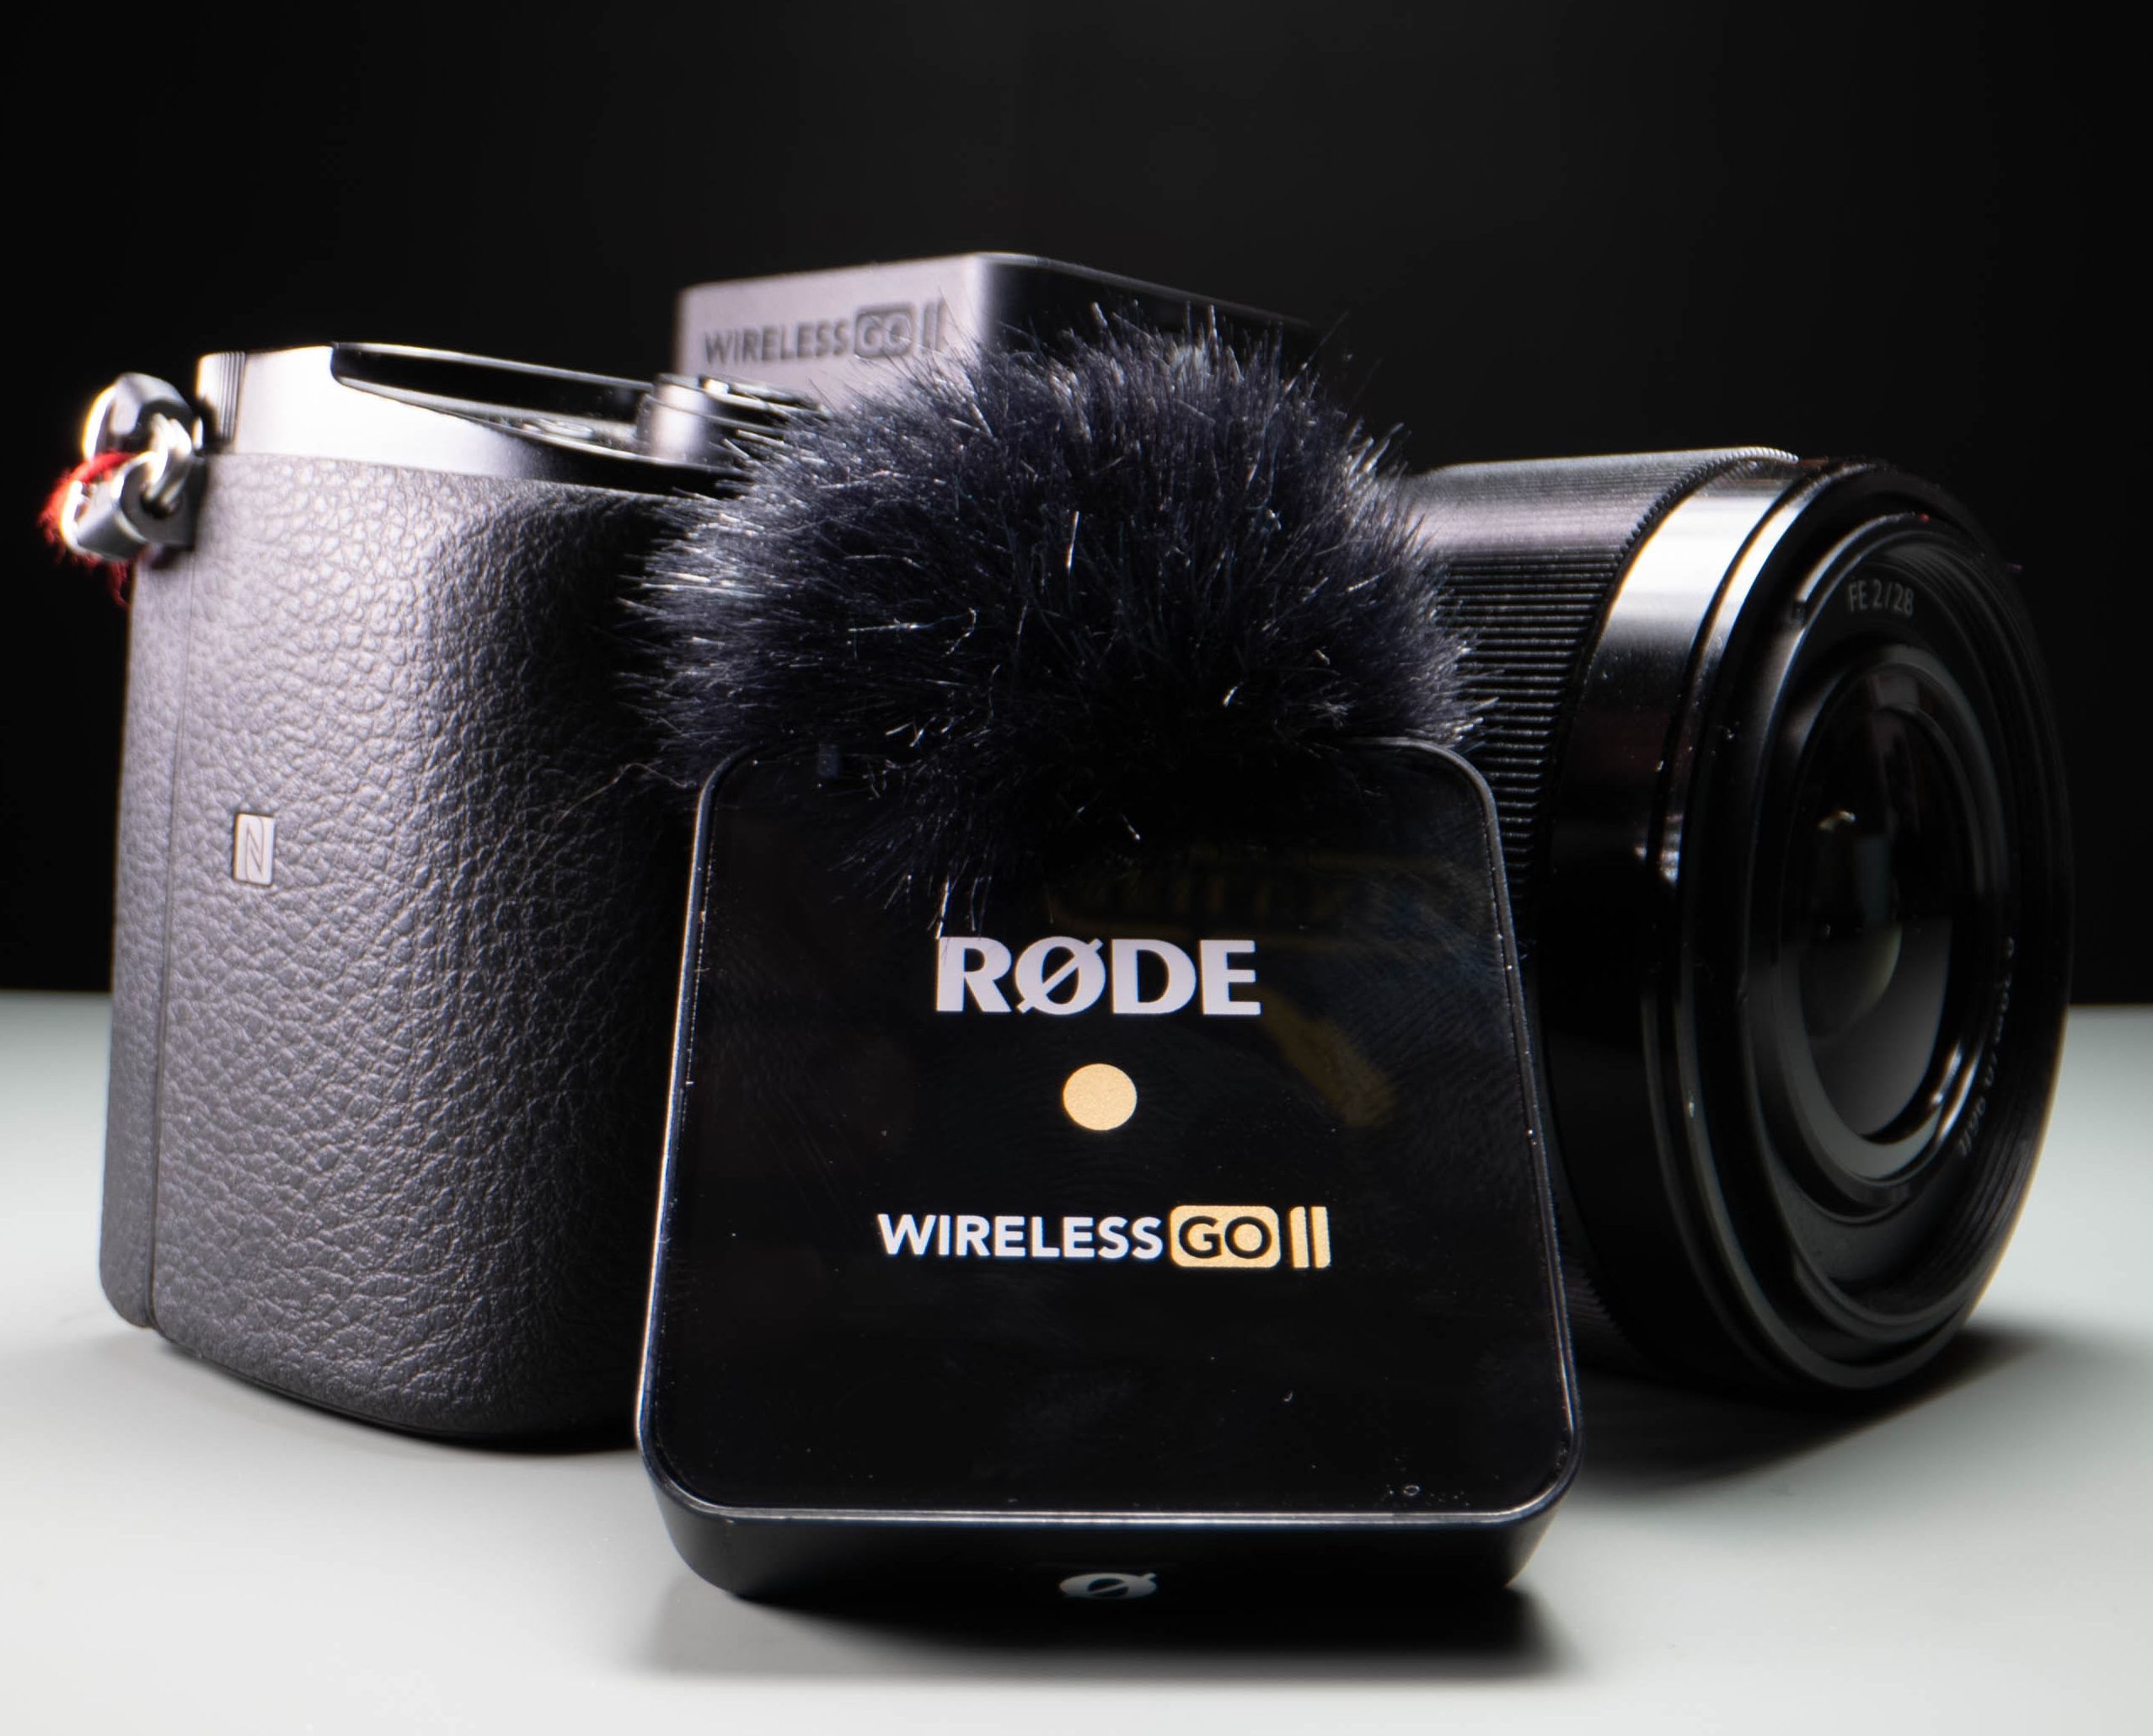 Rode Wireless Go II Connected to Sony a6100